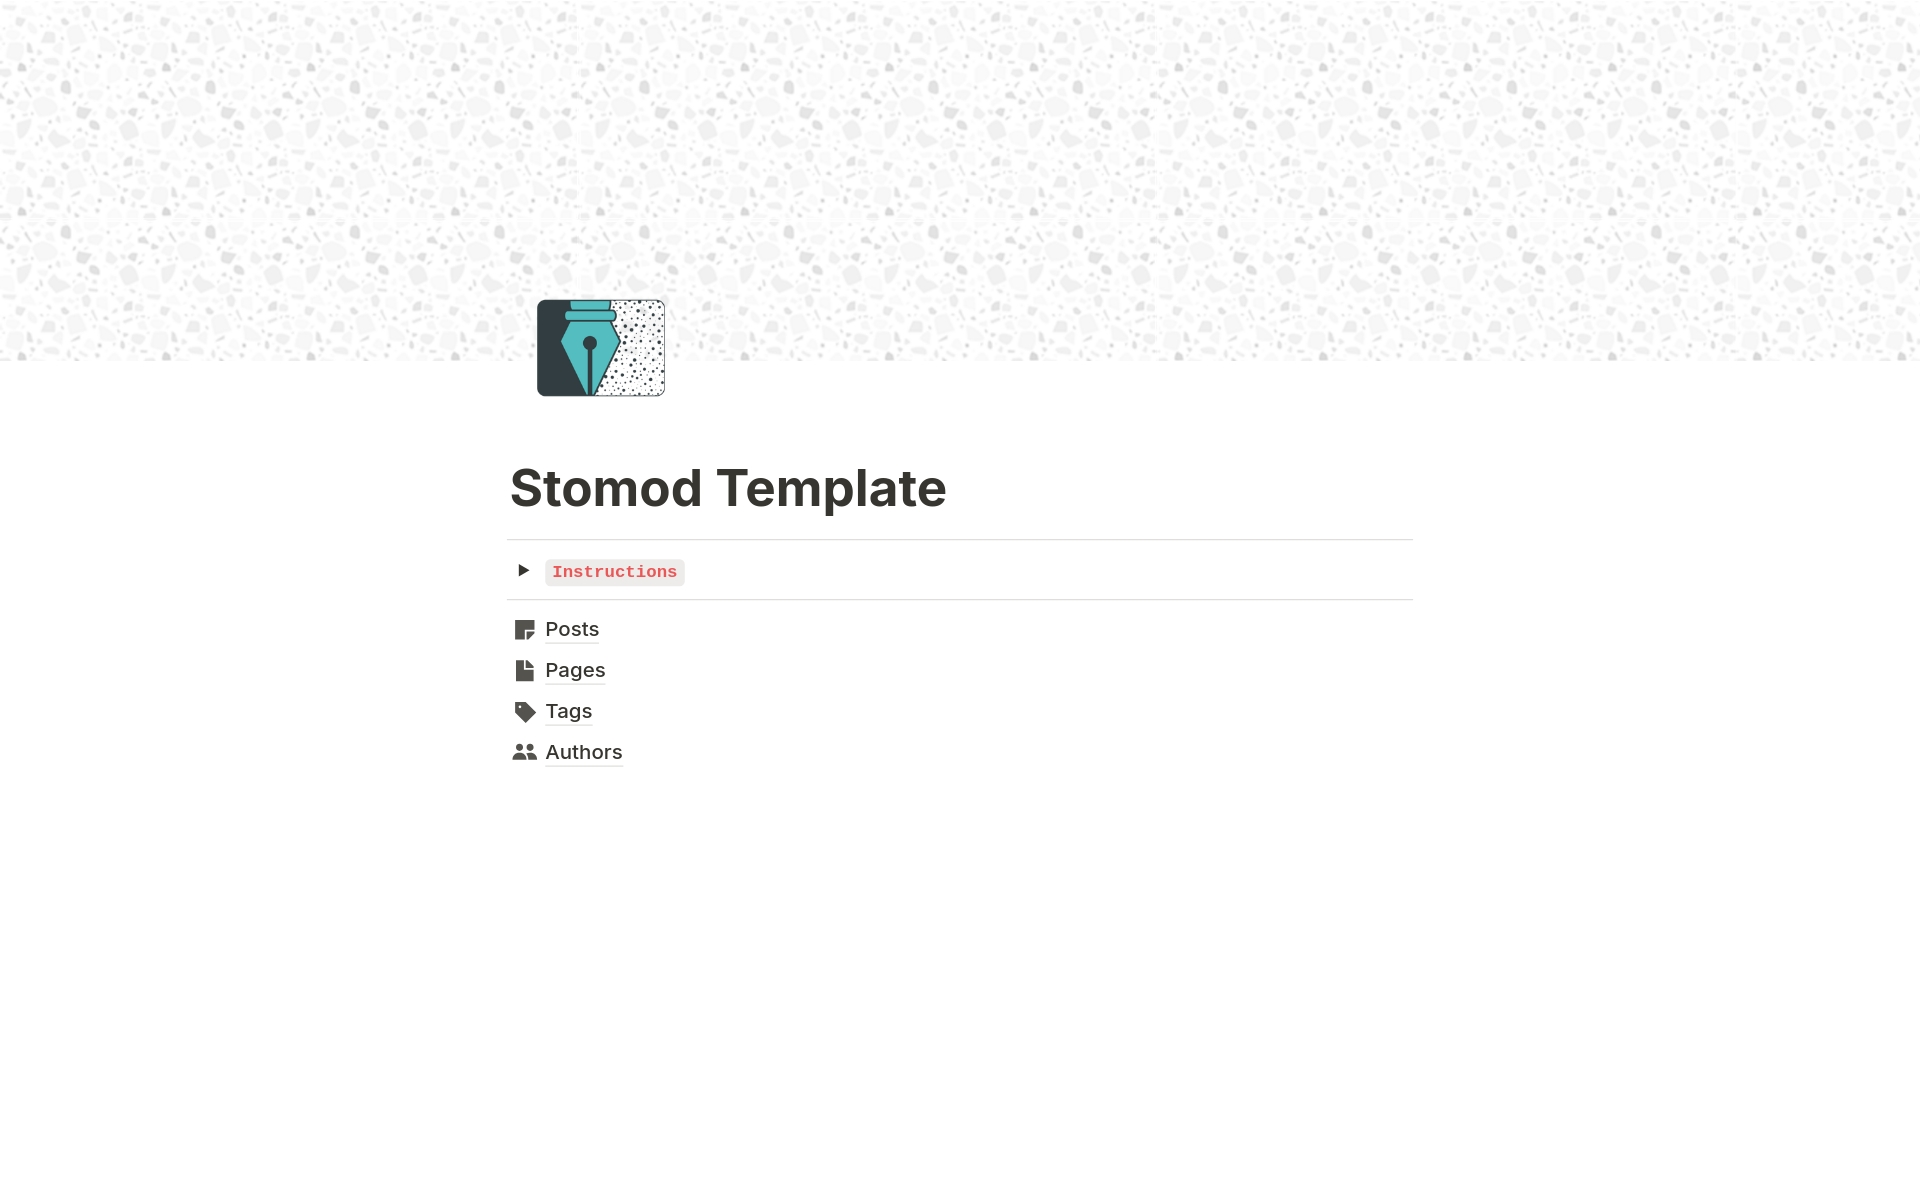 The Stomod blog template allows you to easily setup a content creation workflow for blogging with support for posts, pages, authors and tags. You can also specify slugs, meta tags, and several other properties to associate with your blog post.